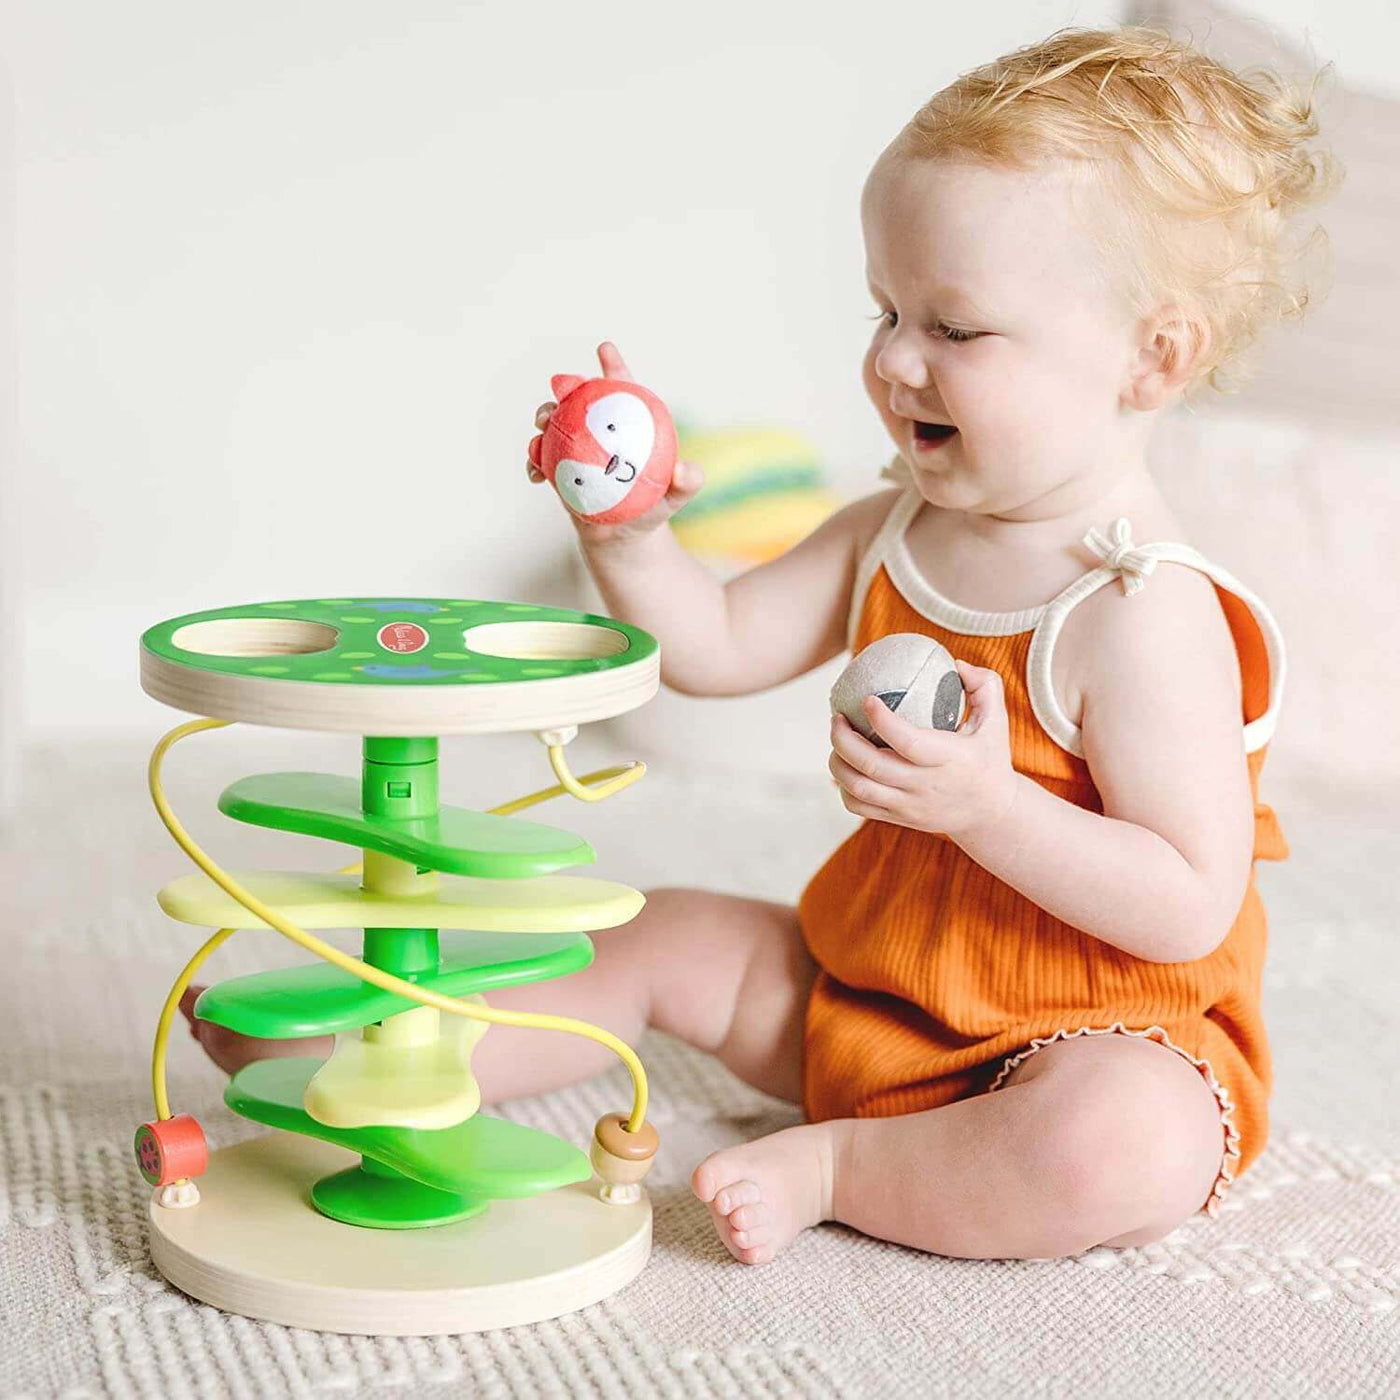 Melissa & Doug Rollables Treehouse Twirl Infant and Toddler Toy Earthlets